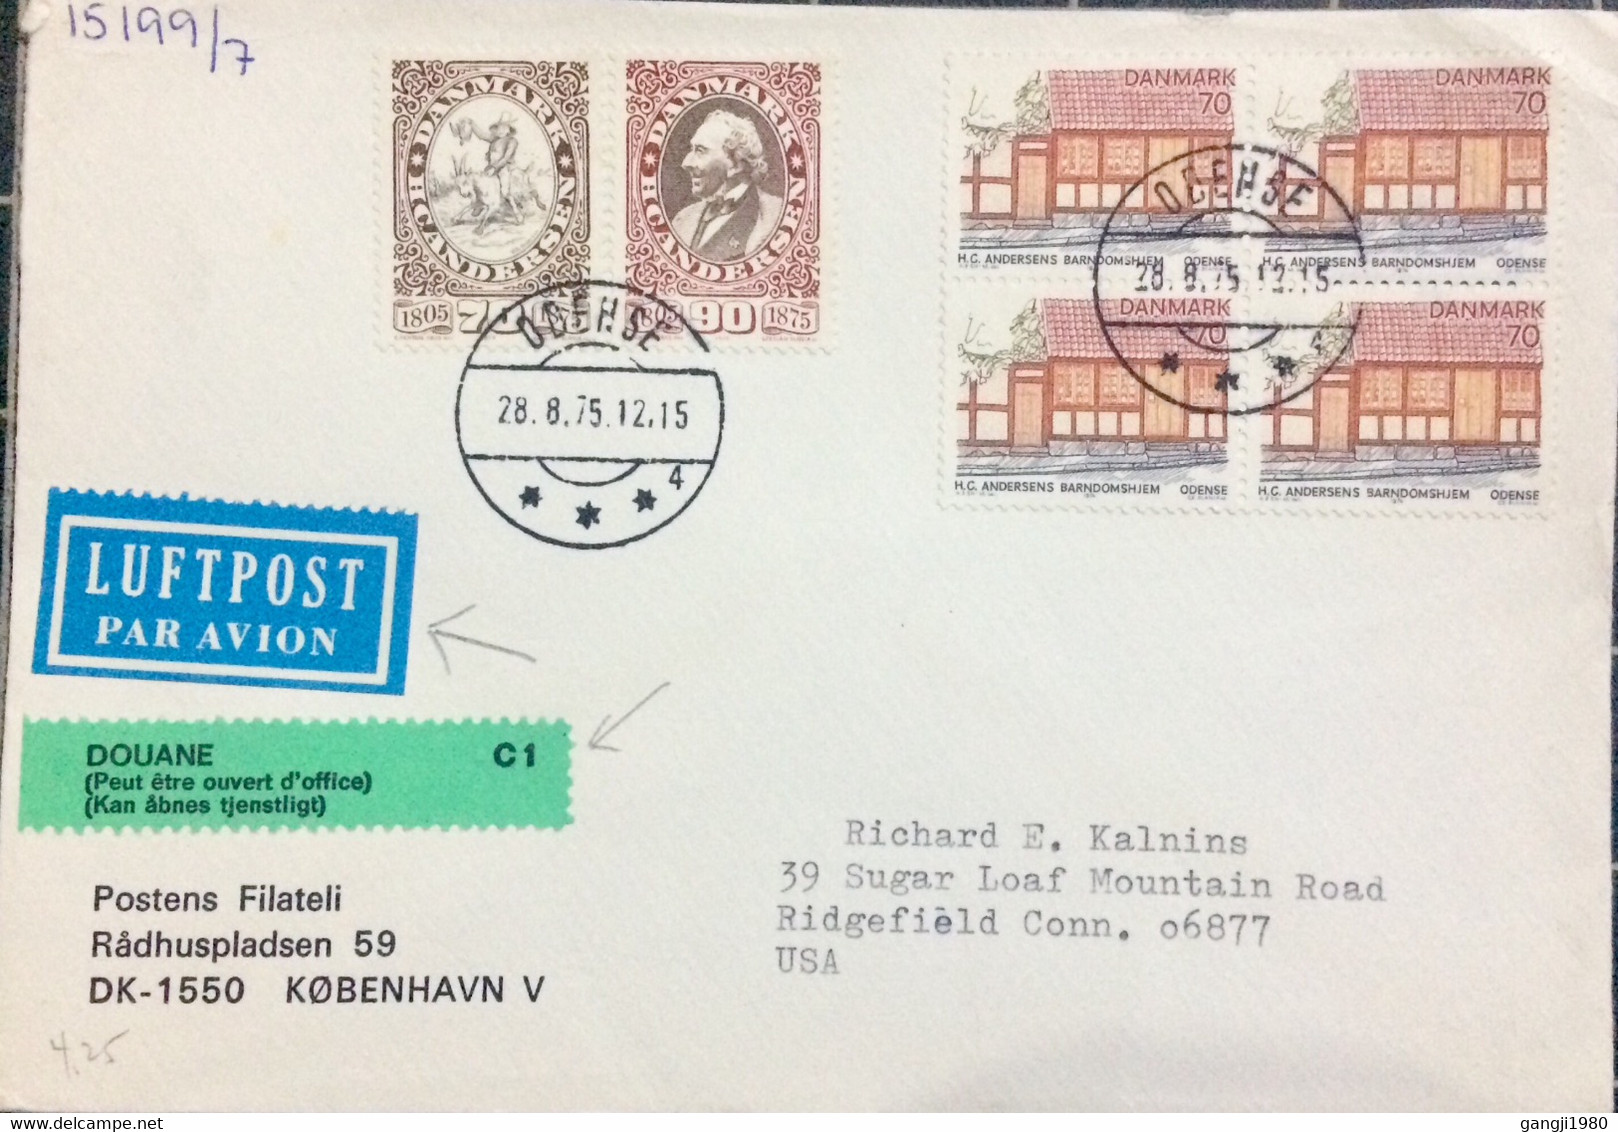 DENMARK 1975, COVER USED TO USA, NUMSKULL JACK, HANS ANDERSEN, ODENCE CITY CANCEL, AIRMAIL, DOUBLE & CUSTOMS LABEL - Briefe U. Dokumente